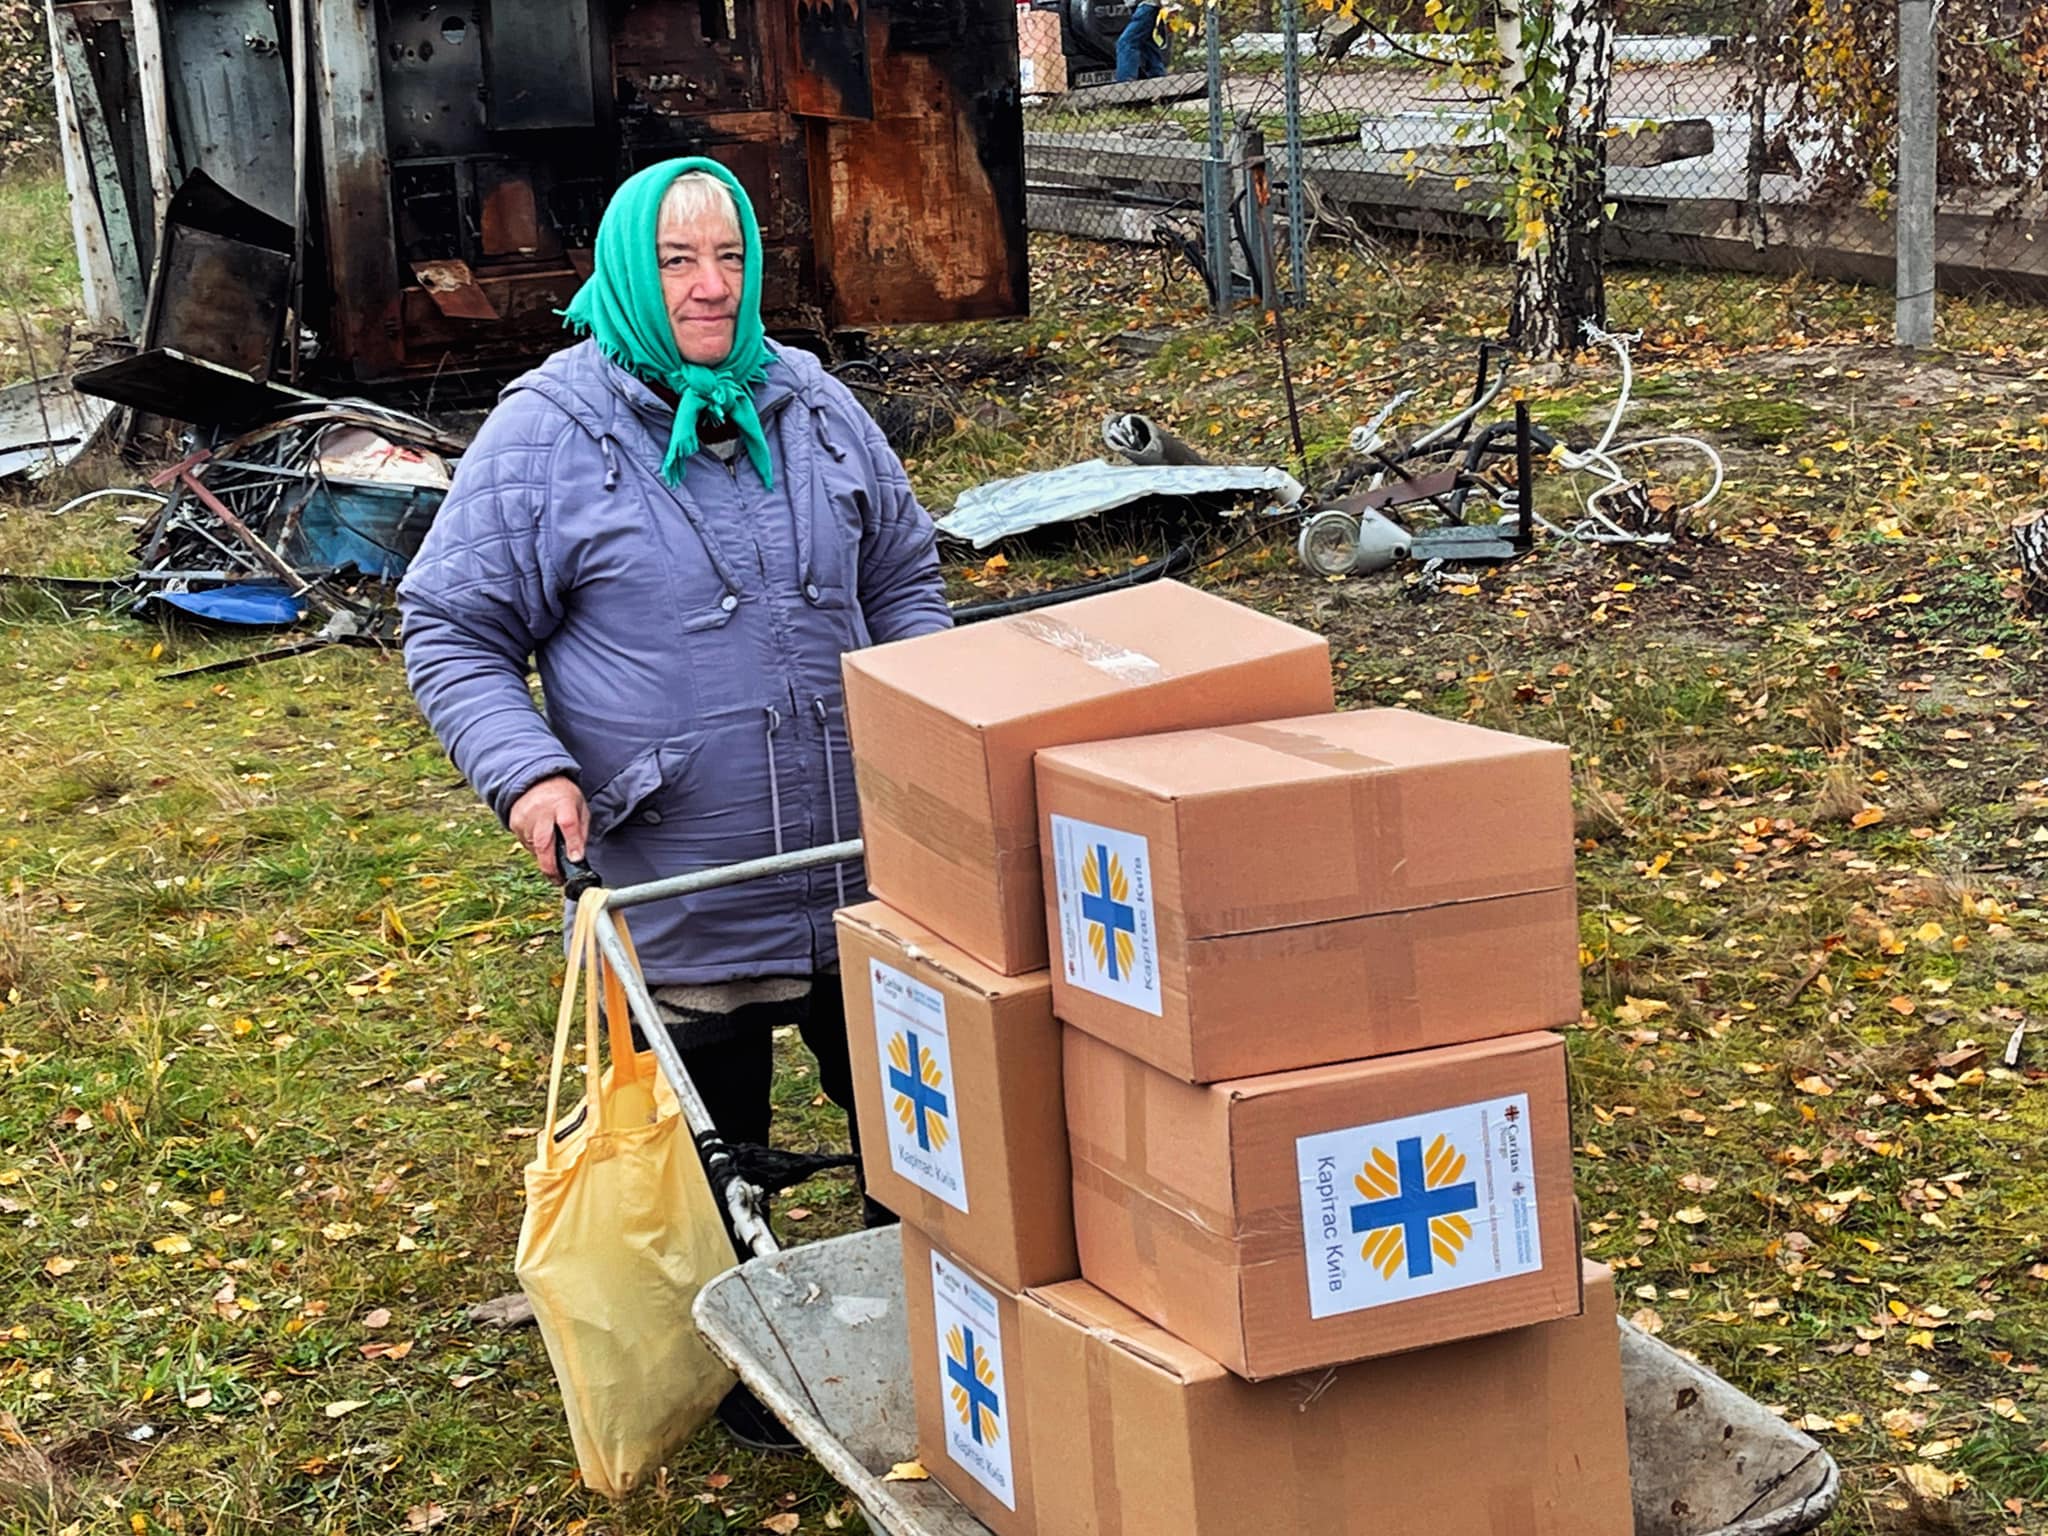 An elderly woman wheels away boxes of food and other equipment funded with support from Caritas Norway.